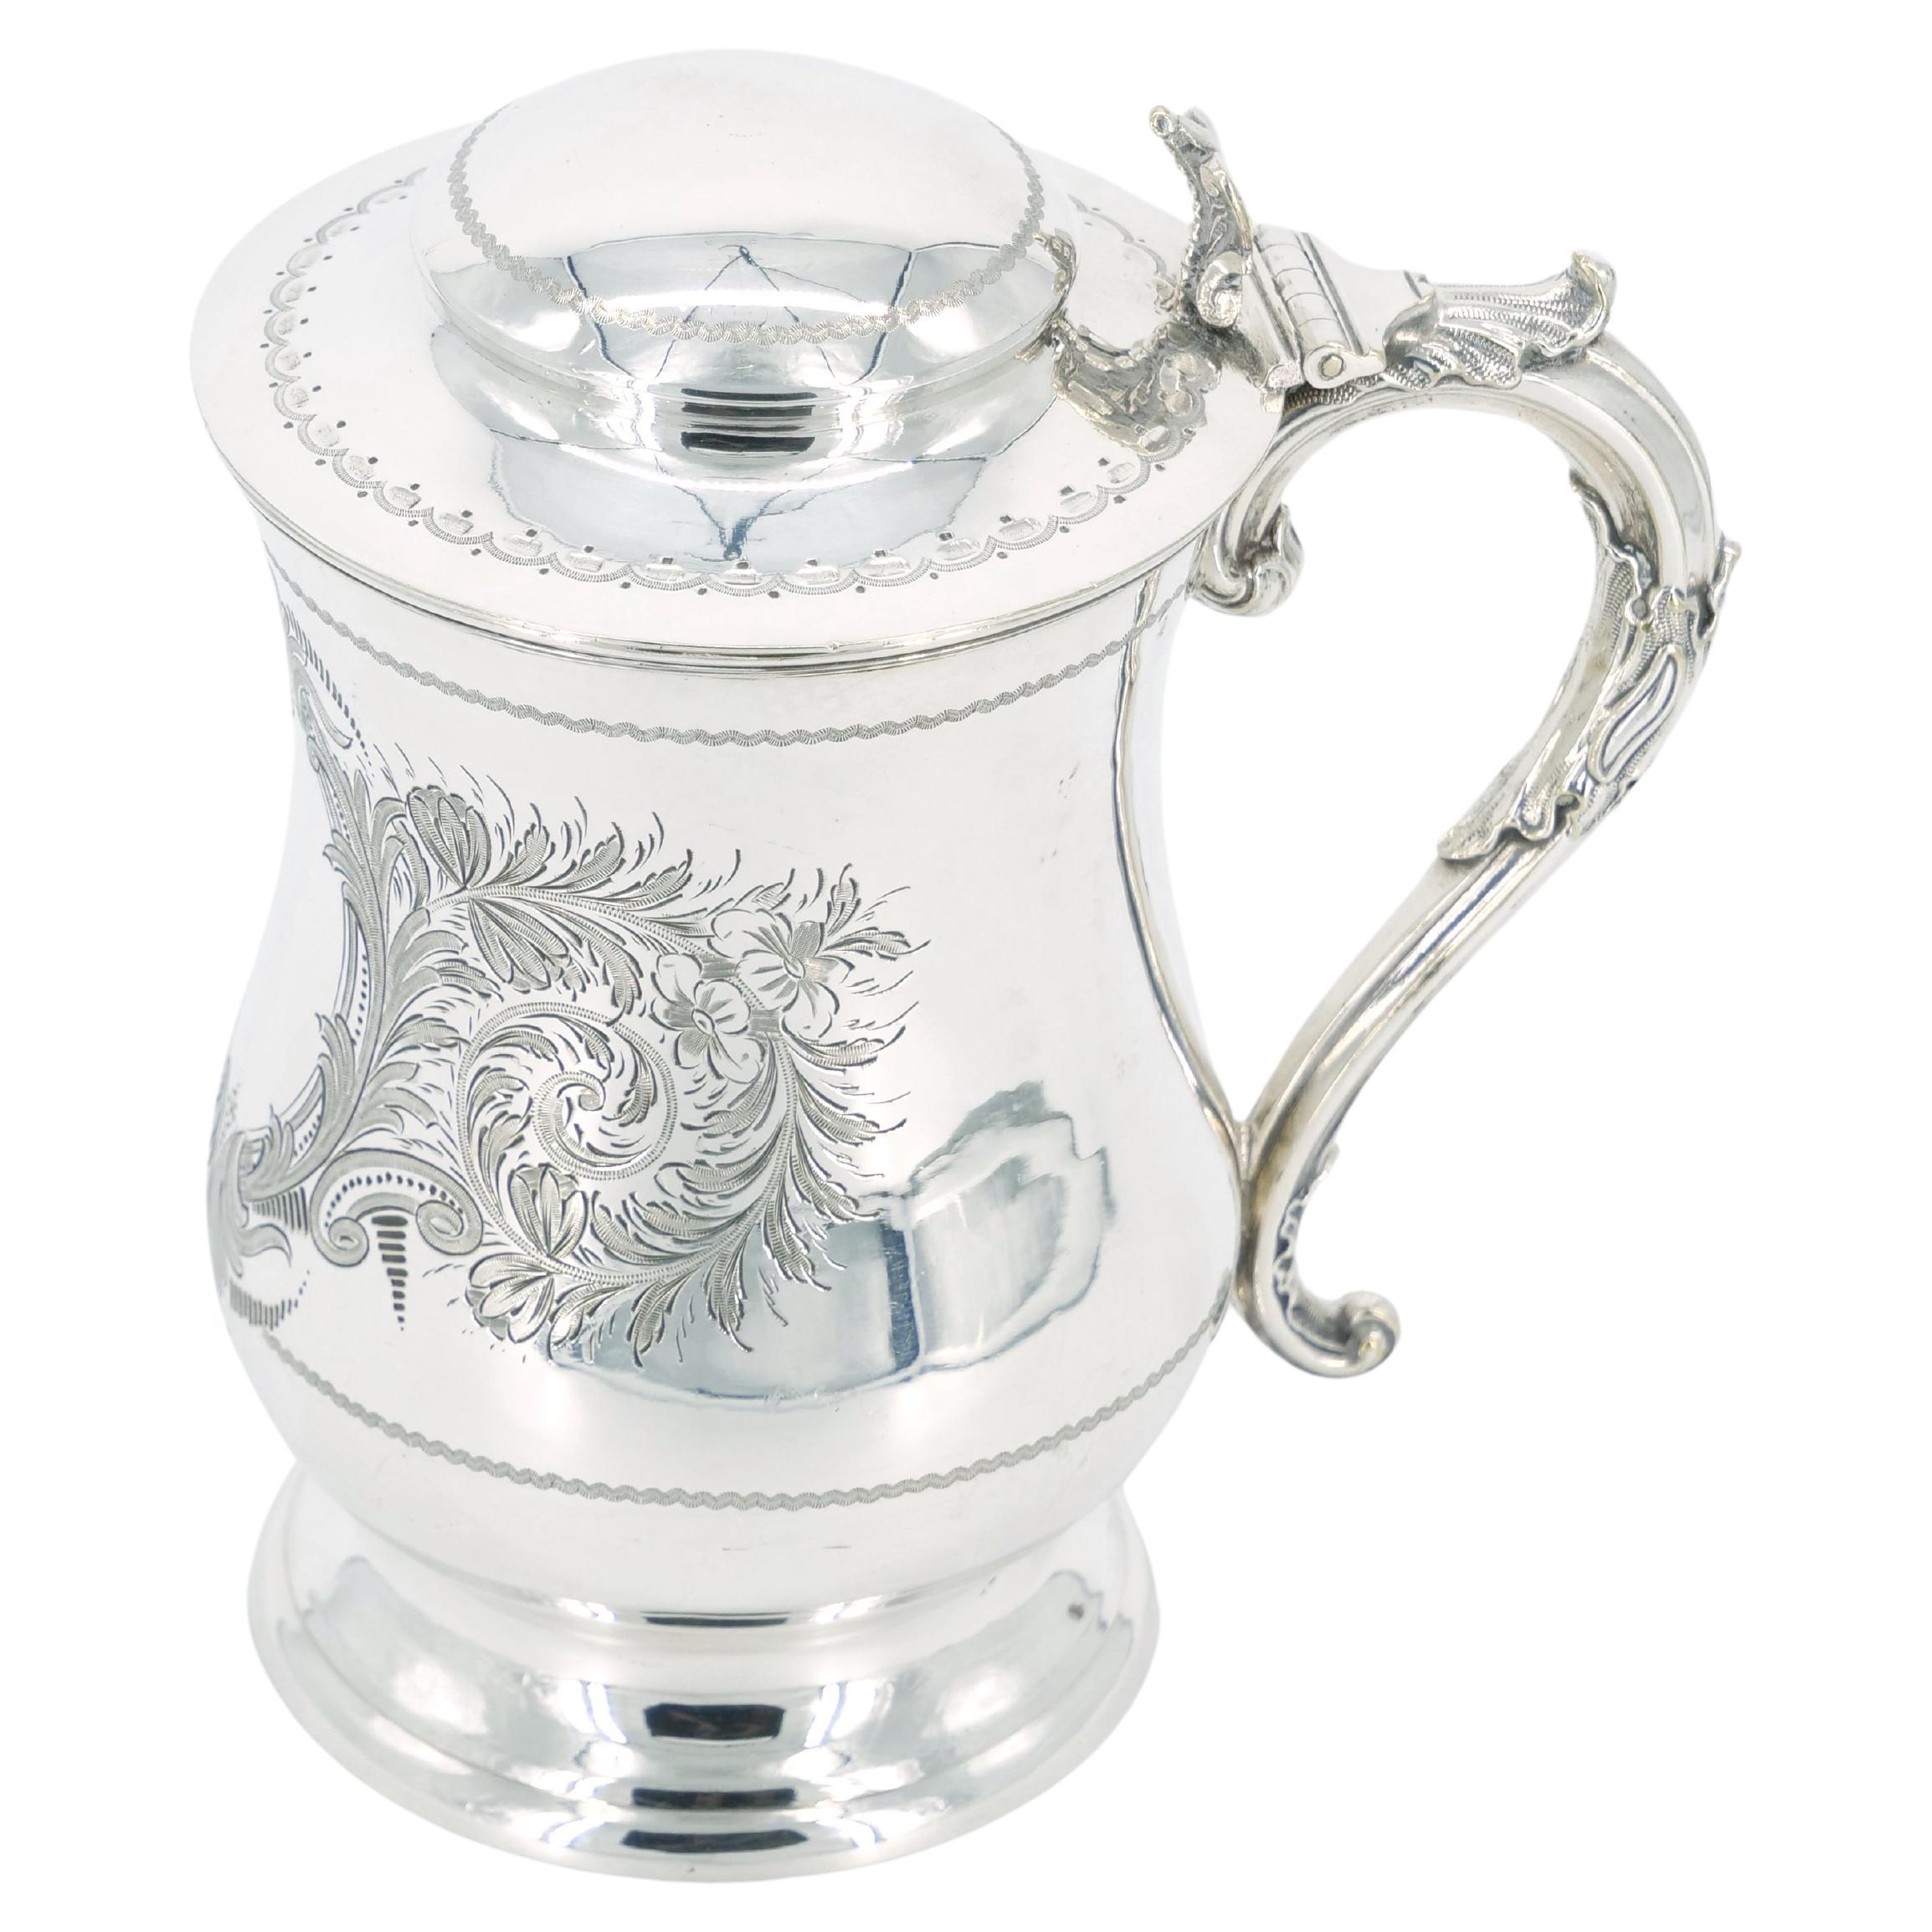 English Silver Plate Engraved Exterior Queen Anne Tankard